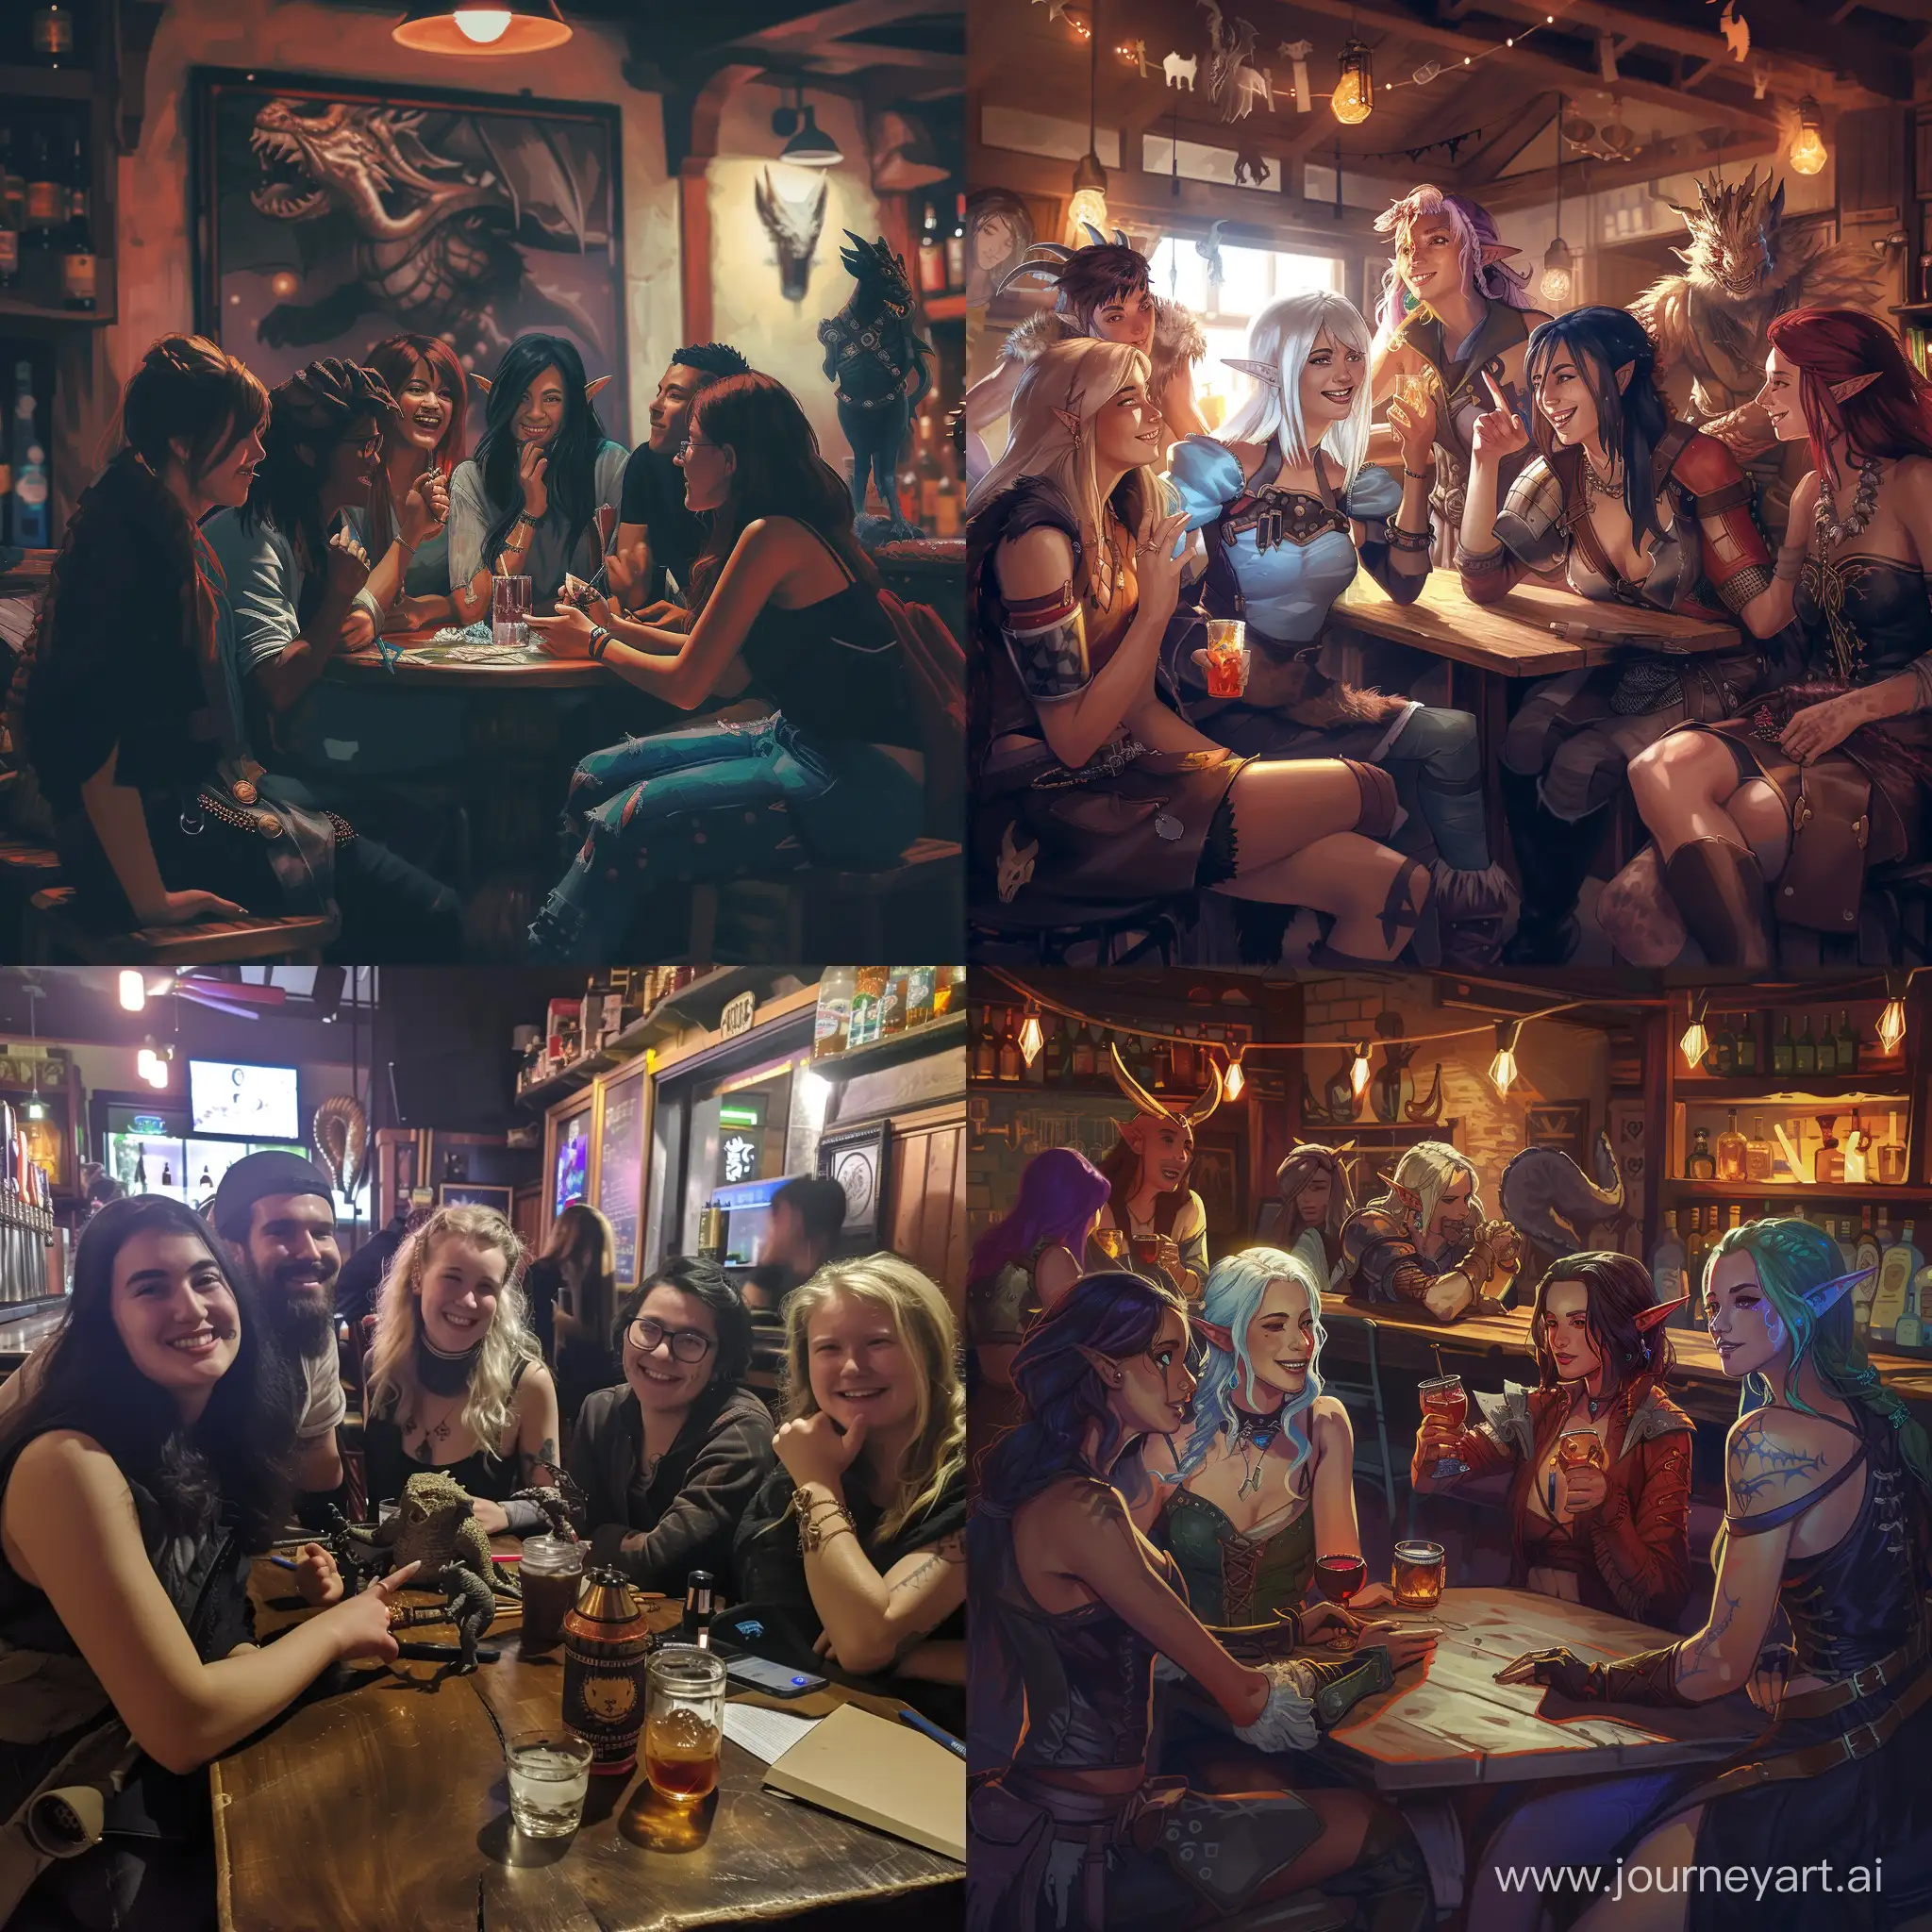 Fantasy-Fun-Dungeons-Dragons-Night-at-the-Bar-with-Mage-Rogue-and-Berserkers